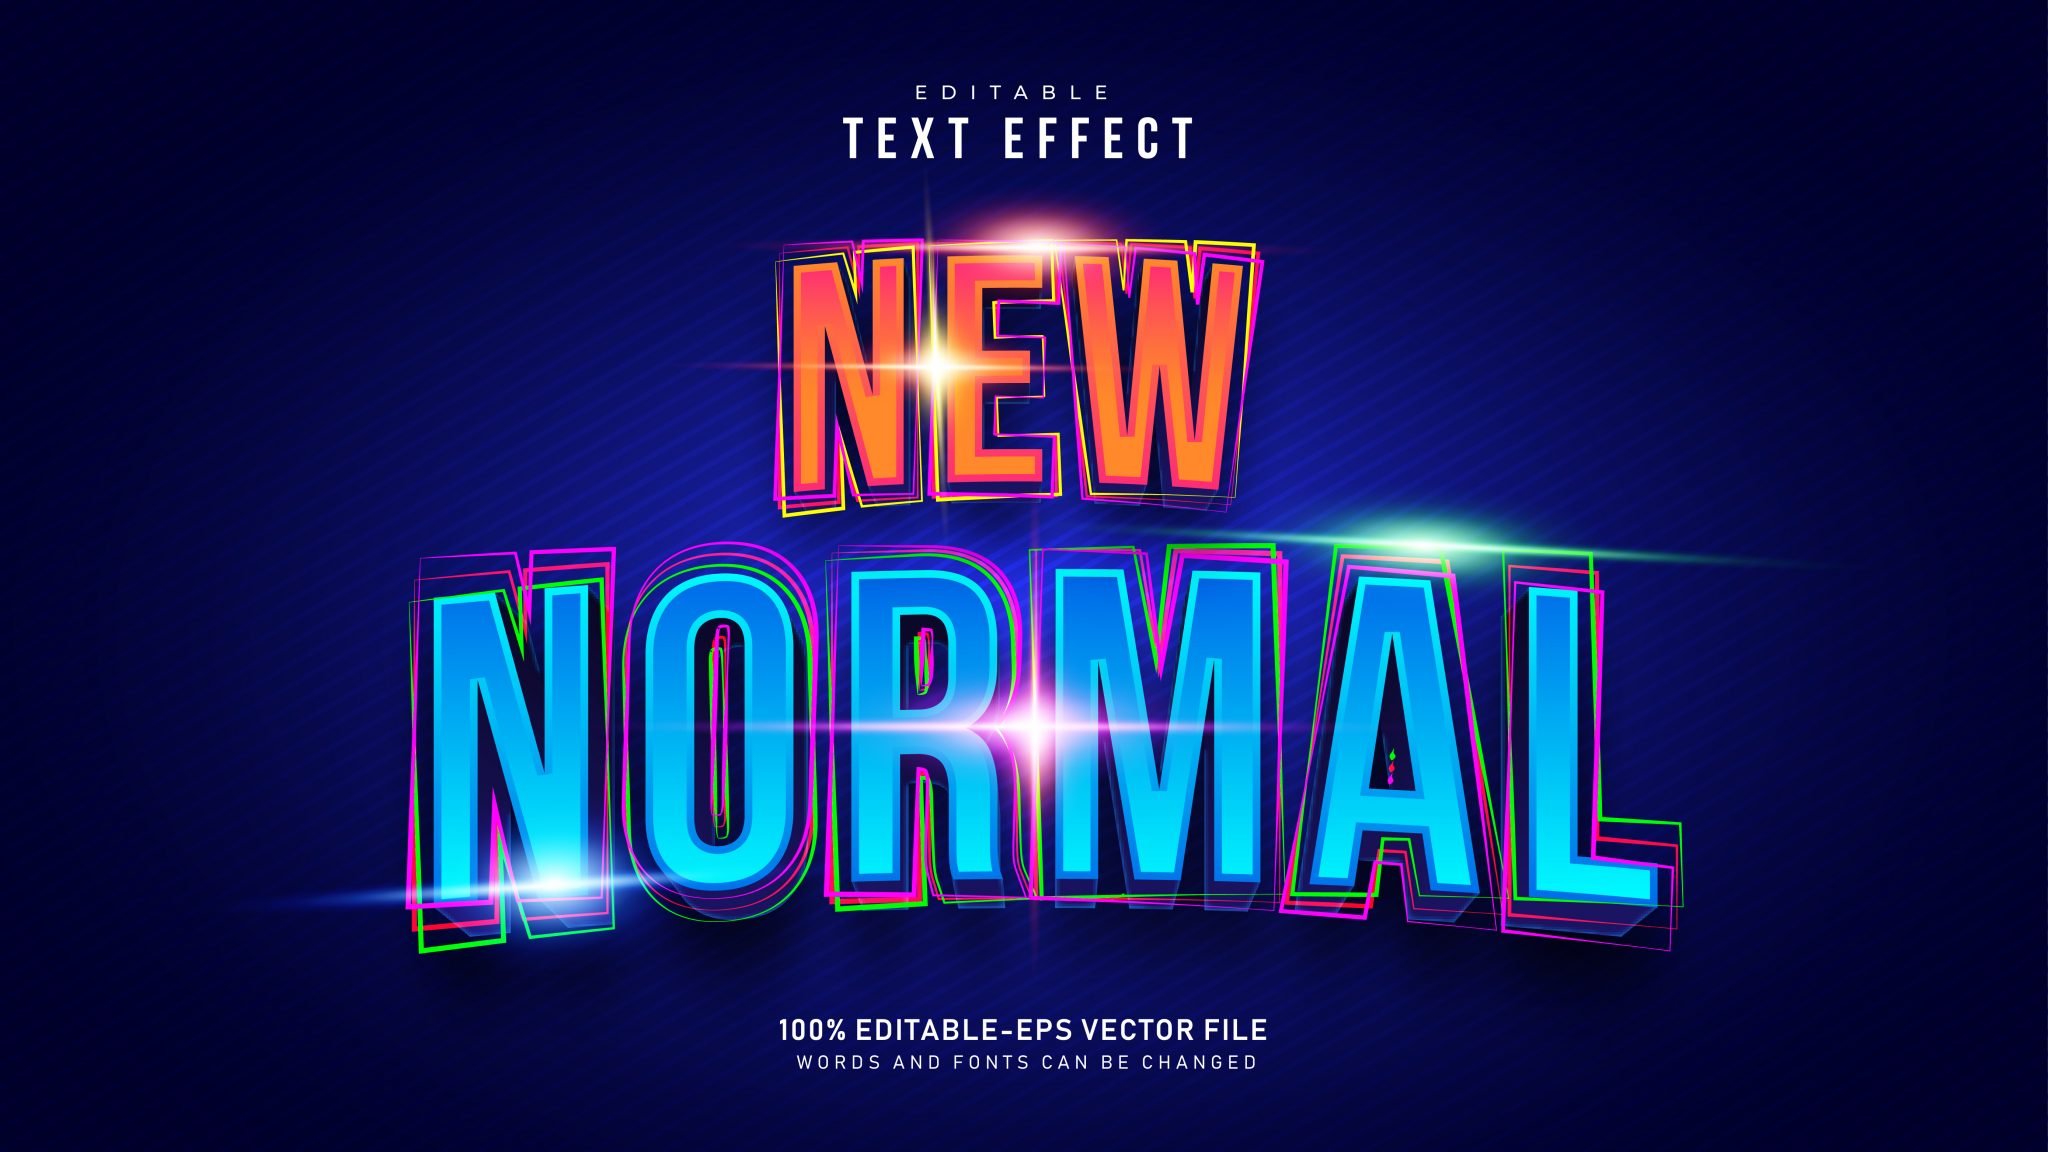 Neon Editable Text Effect – GraphicsFamily